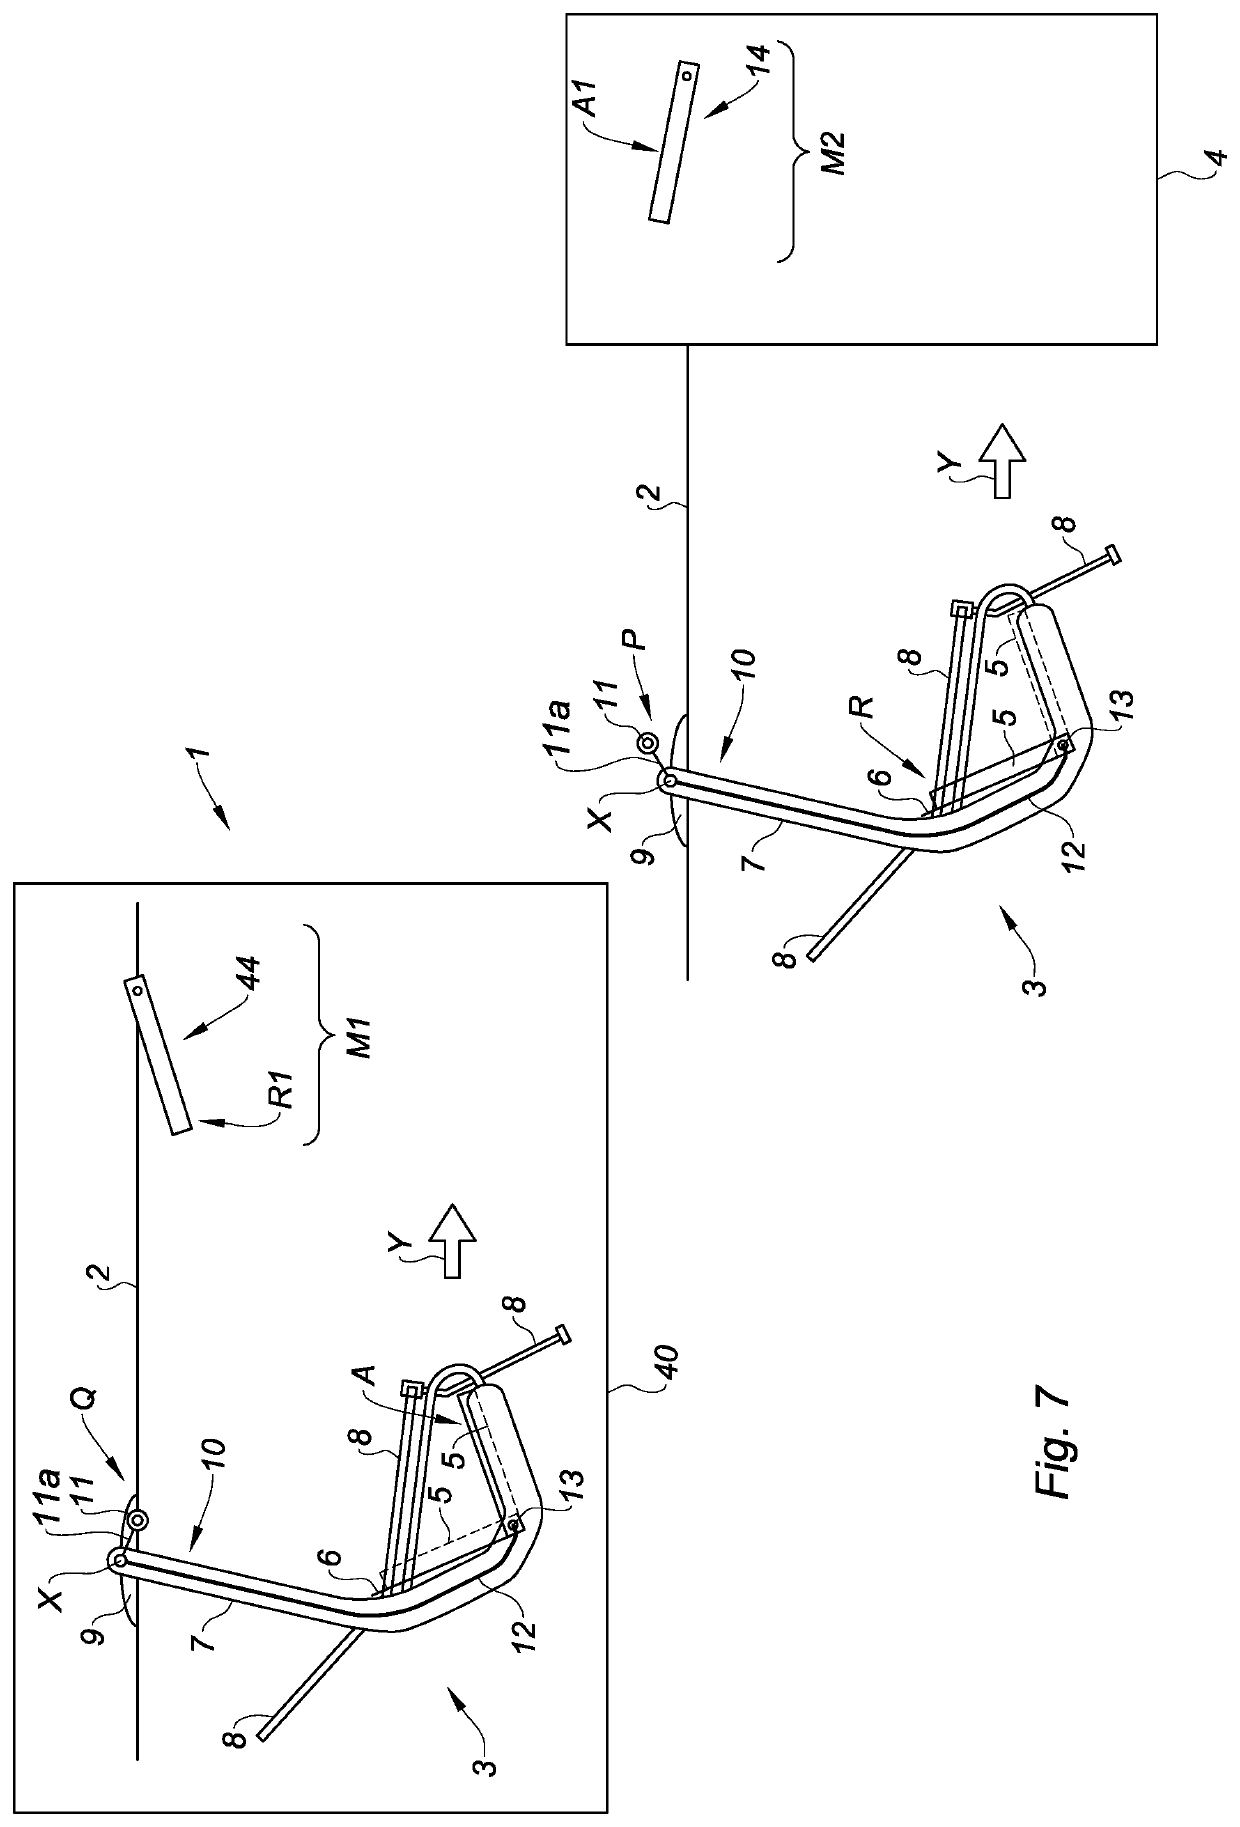 Installation and method of transport by overhead cable